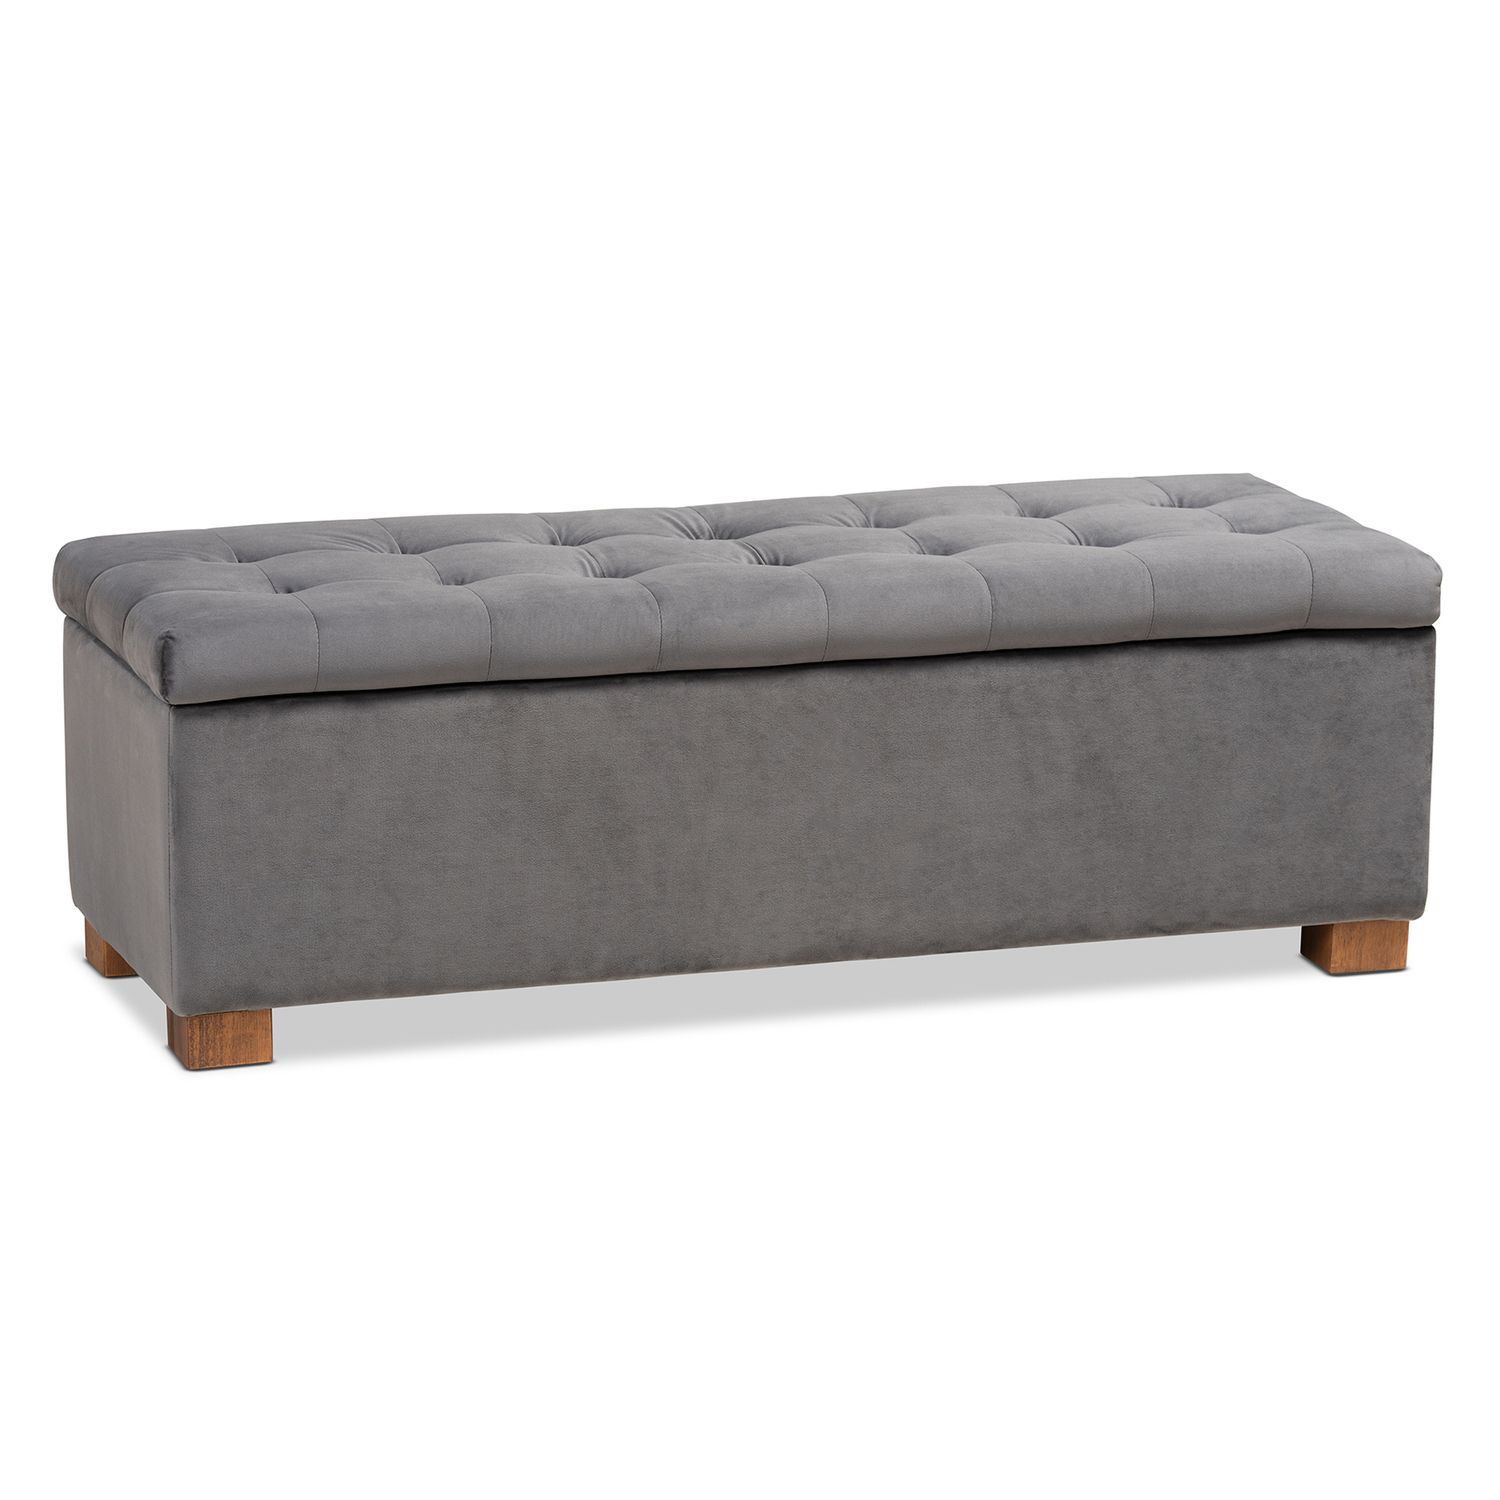 Baxton Studio Roanoke Modern And Contemporary Grey Velvet Fabric With Newest Charcoal Gray Velvet Tufted Rectangular Ottoman Benches (View 1 of 10)